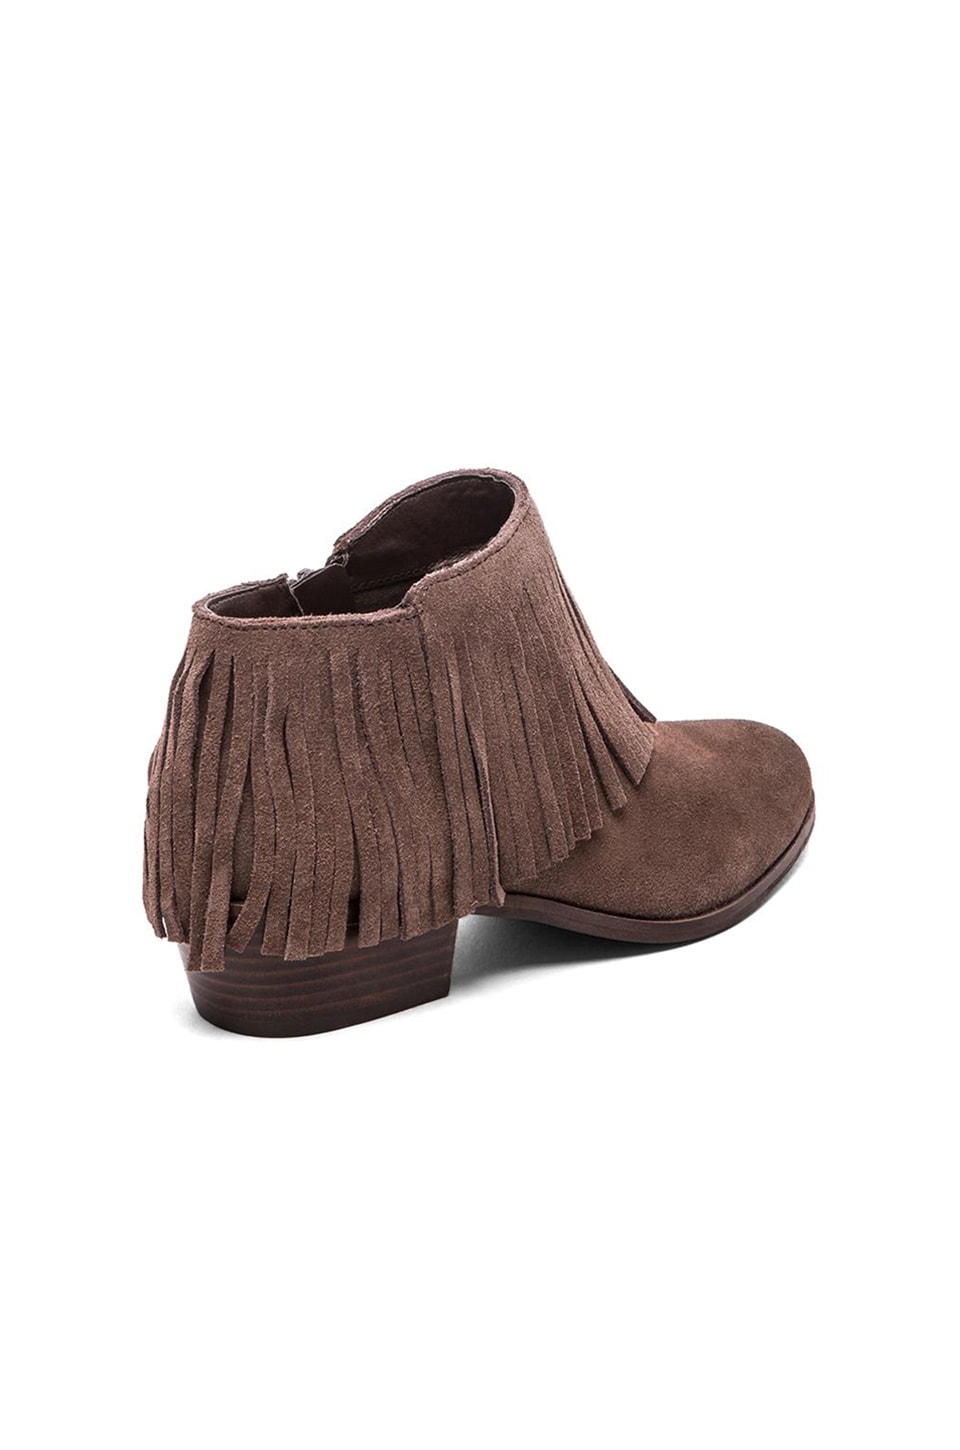 Steve Madden Patzee Bootie in Taupe Suede